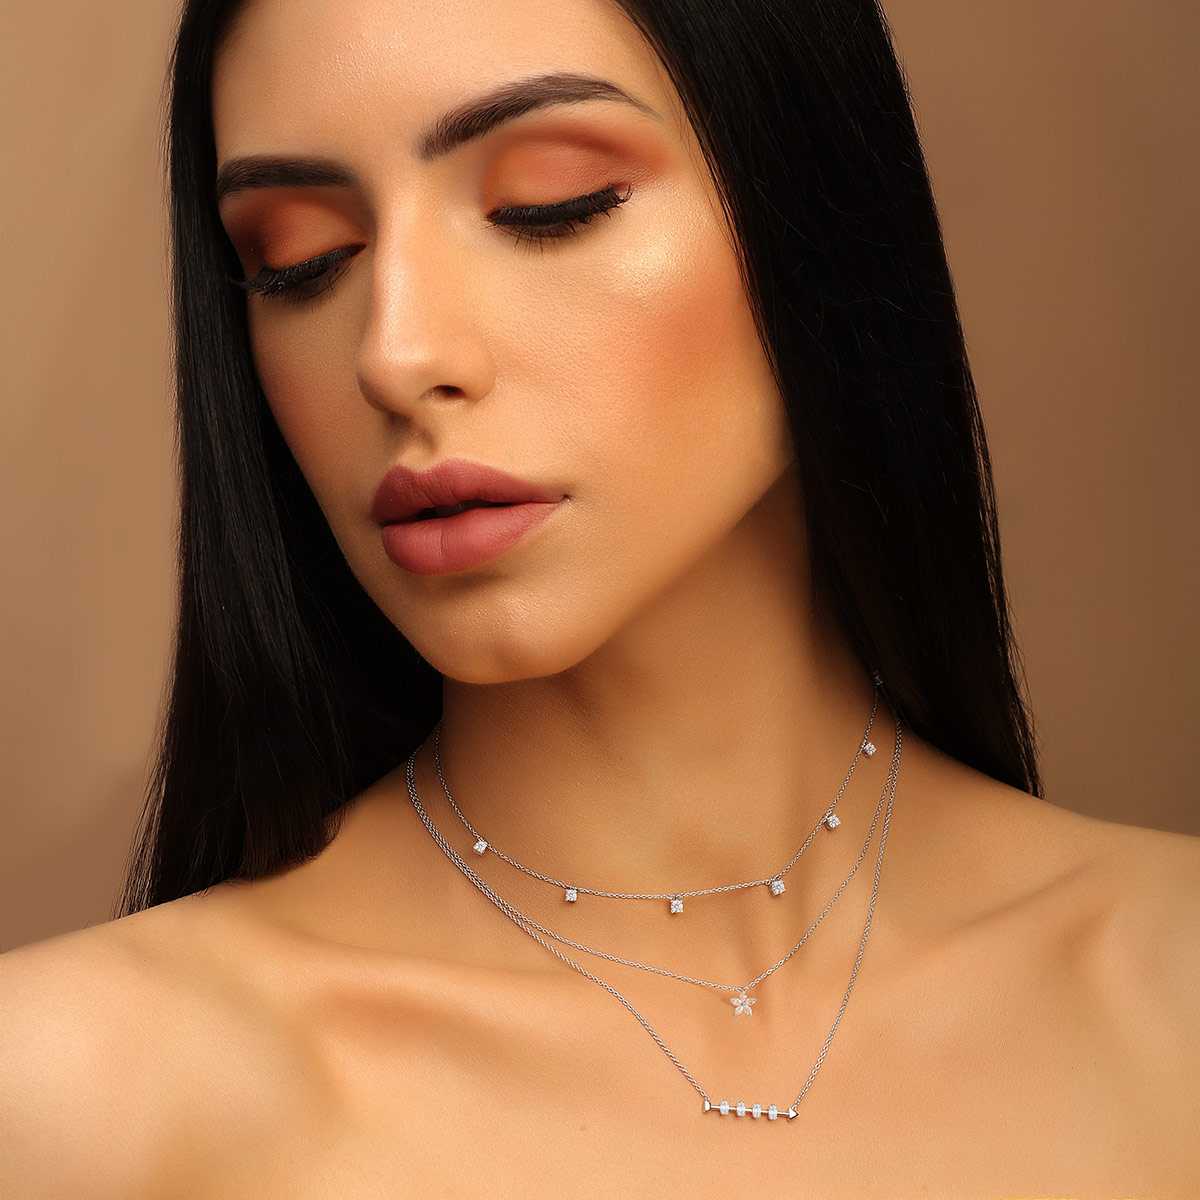 Seven Round Centered Diamond Necklace In 18 K Rose Gold From Chokers Collection